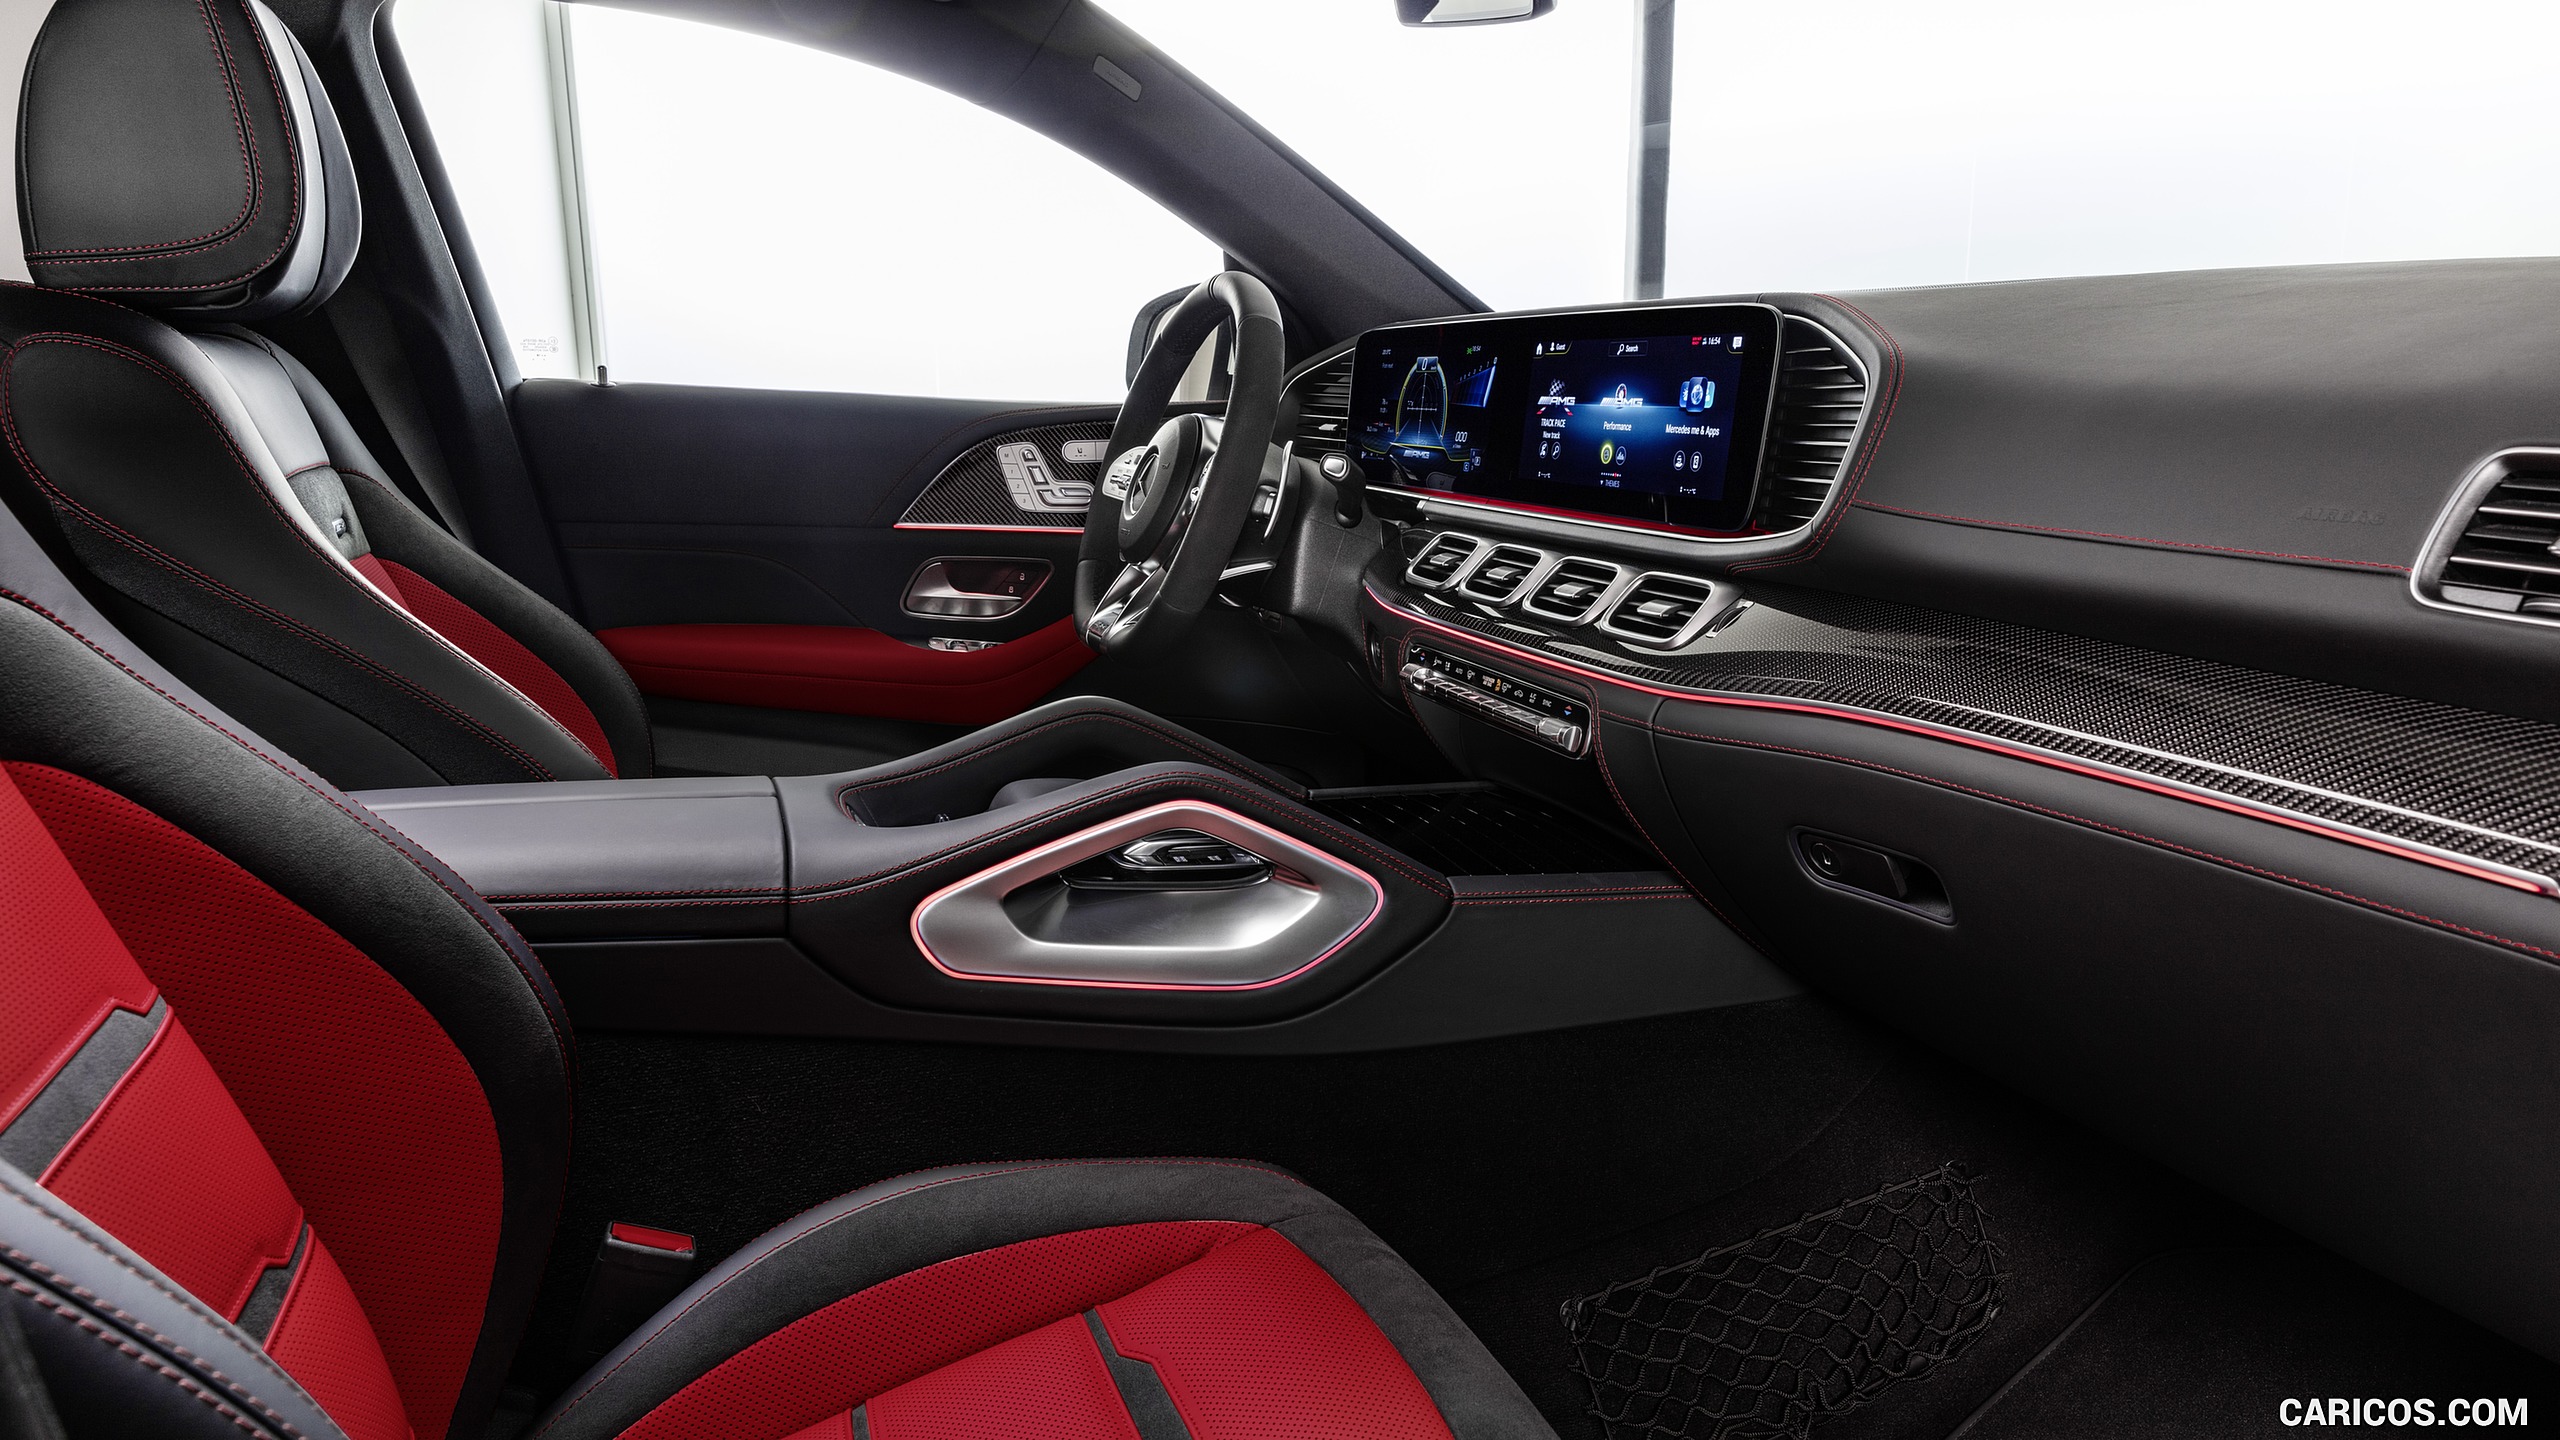 2021 Mercedes-AMG GLE 53 Coupe 4MATIC+ - Interior, #35 of 178